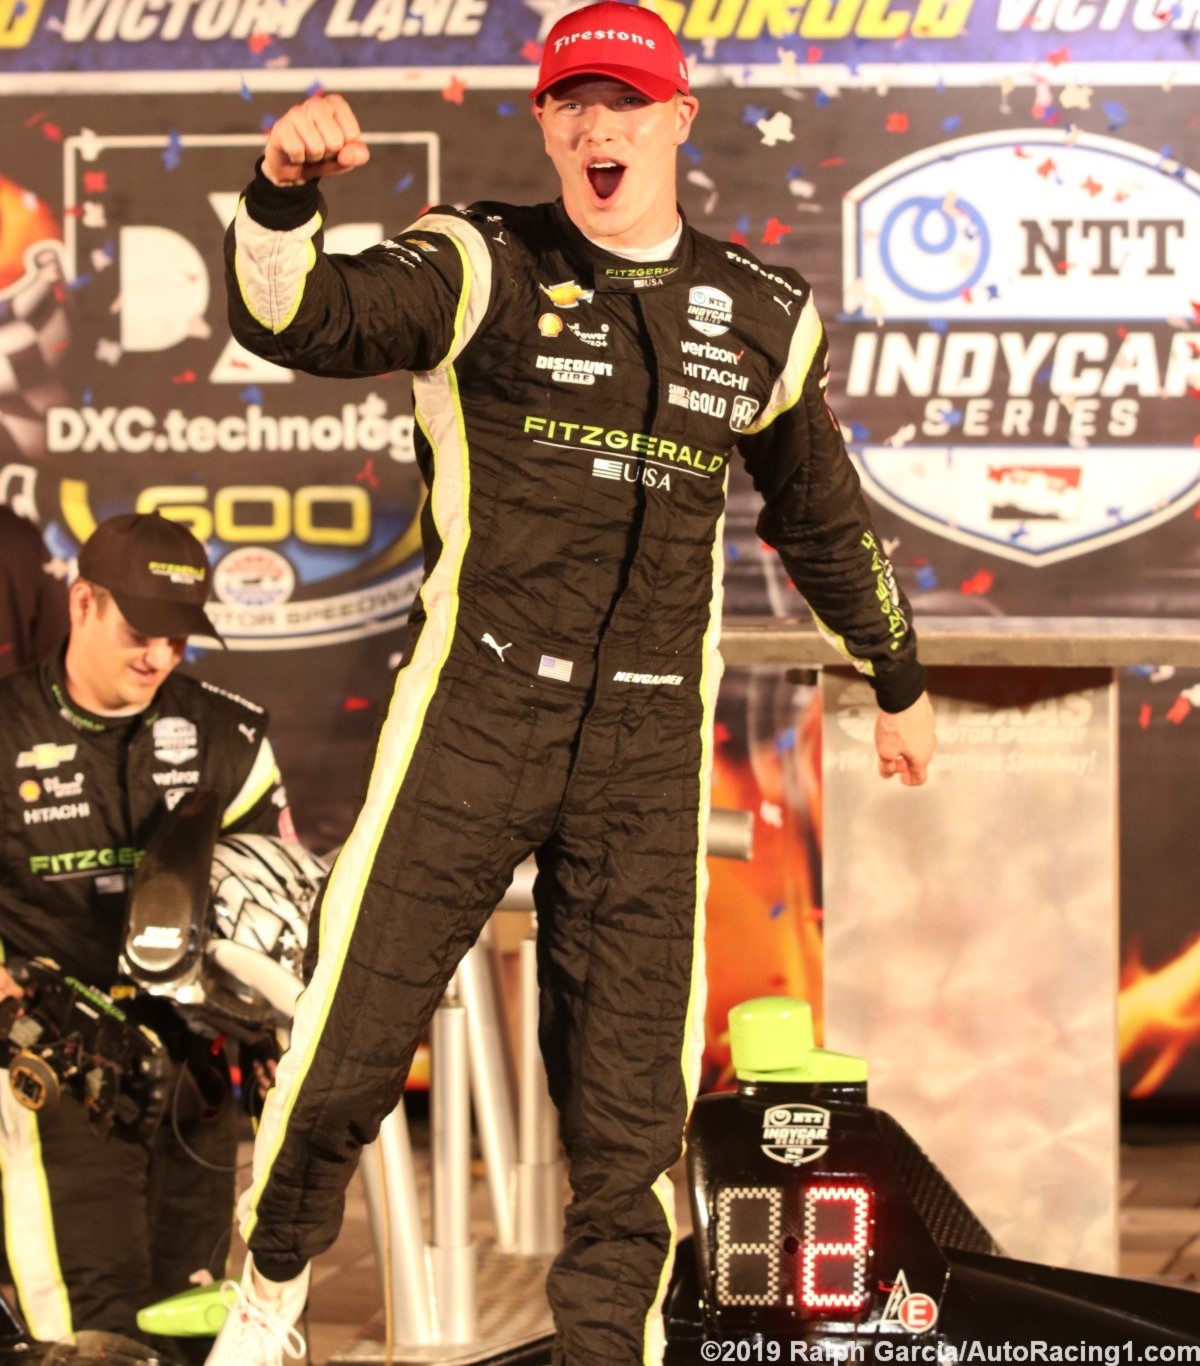 Newgarden was happy about this win